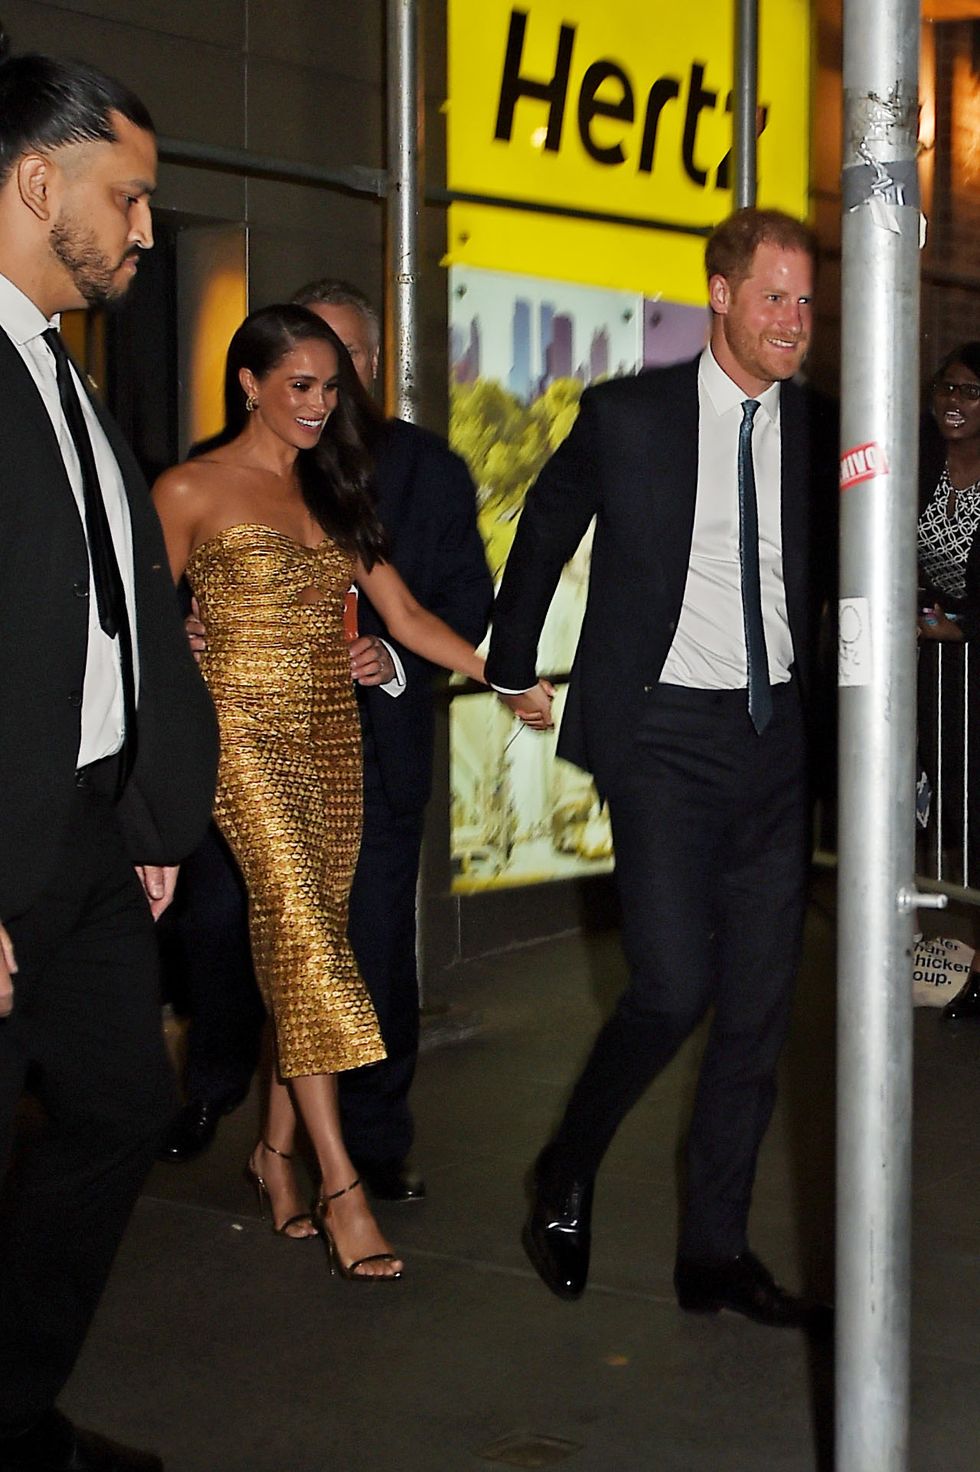 new york, ny 16 may meghan markle, duchess of sussex and prince harry, duke of sussex are seen on may 16, 2023 in new york, new york photo by megagc images